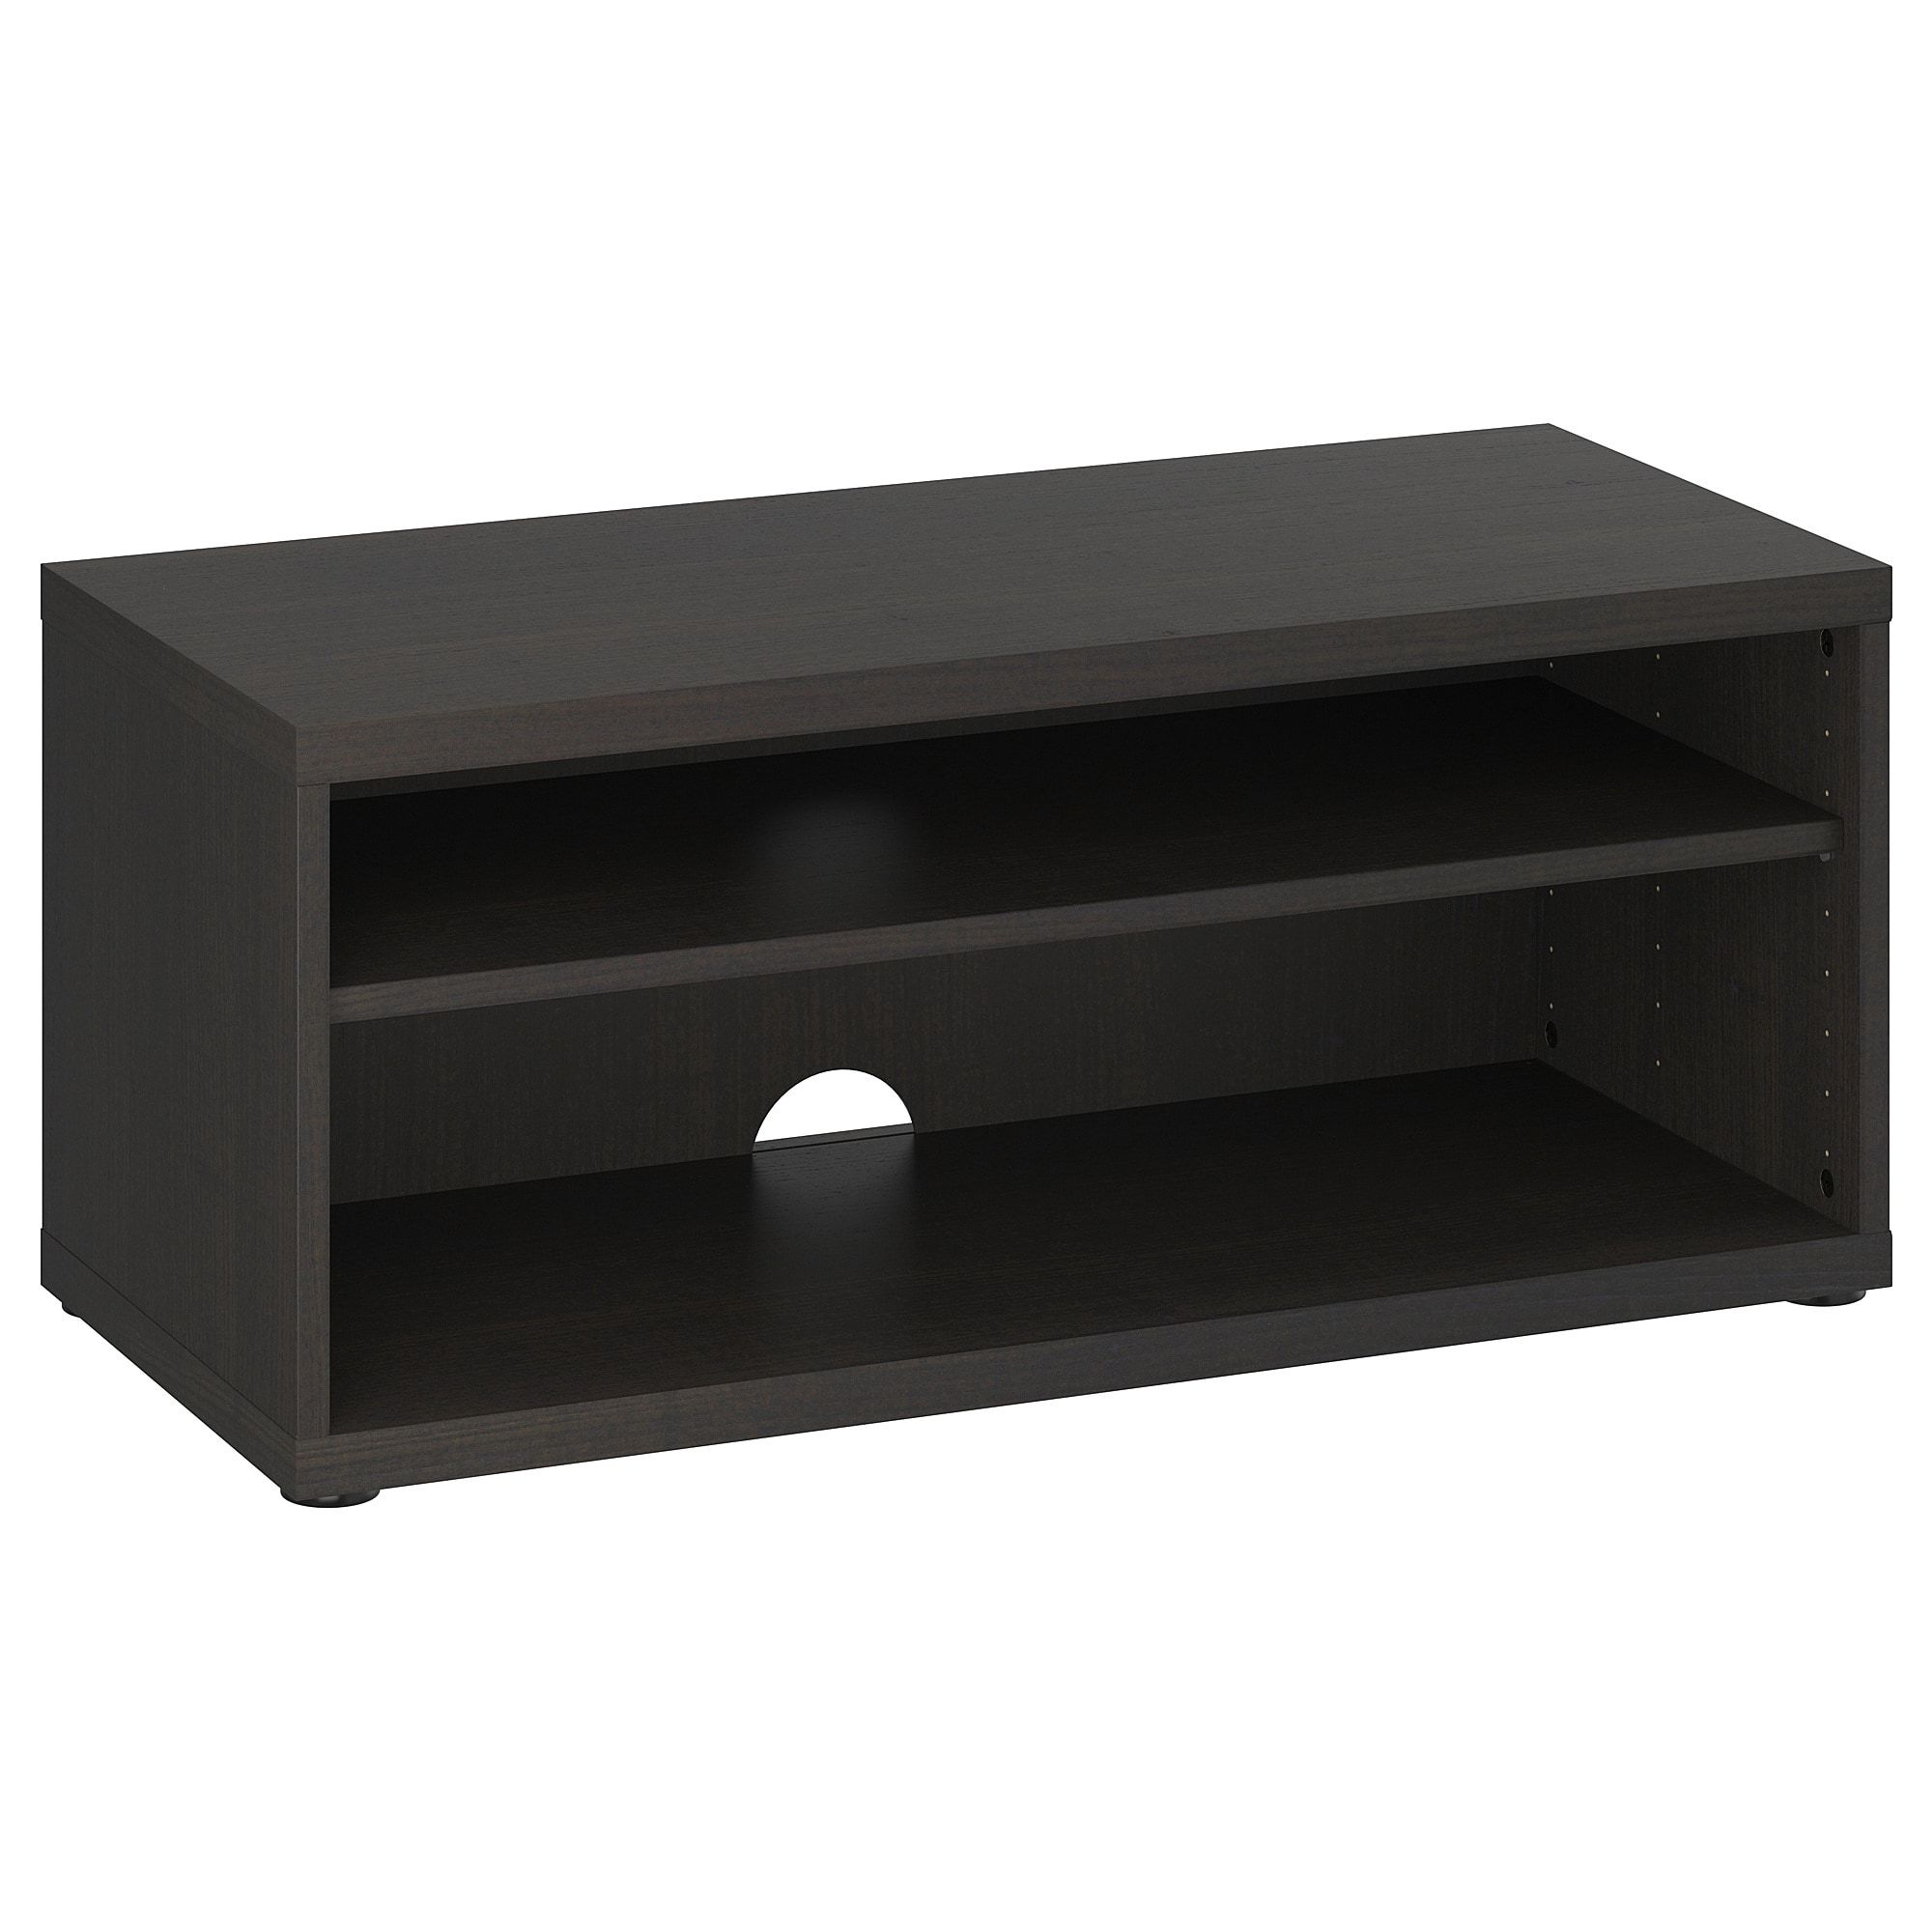 2018 Mosjö Tv Bench Black Brown 90 X 40 X 38 Cm – Ikea Pertaining To Tv Tables (View 3 of 20)